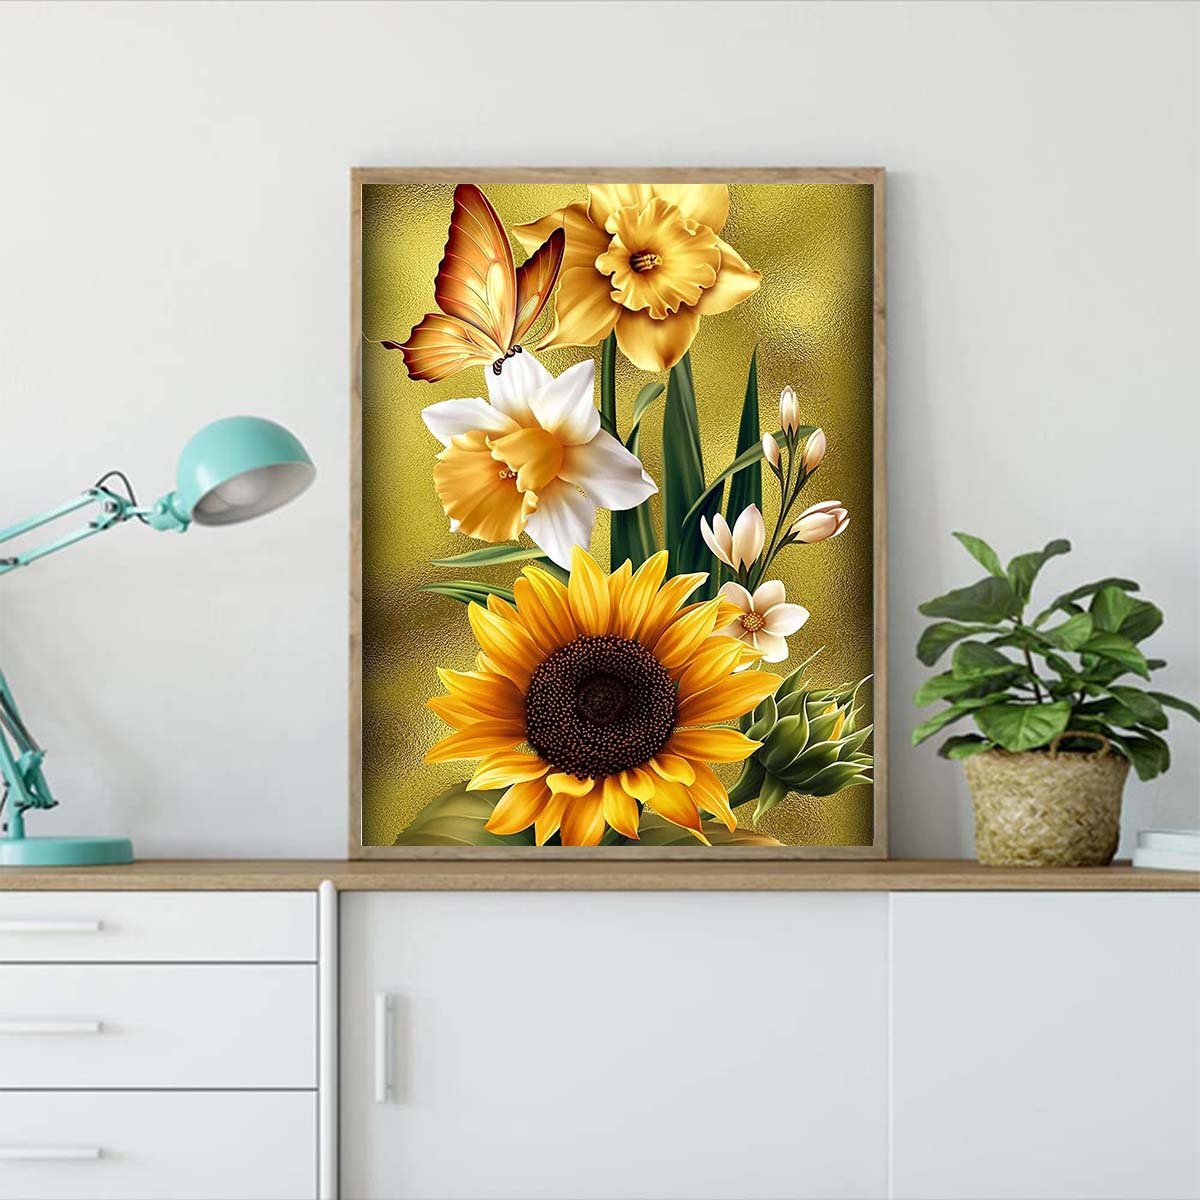 Sunflower Diamond Painting Kits for Adults - Art Beginner, 5D DIY Full Drill Dots Paintings with Diamonds Gem and Crafts Home Wall Decor